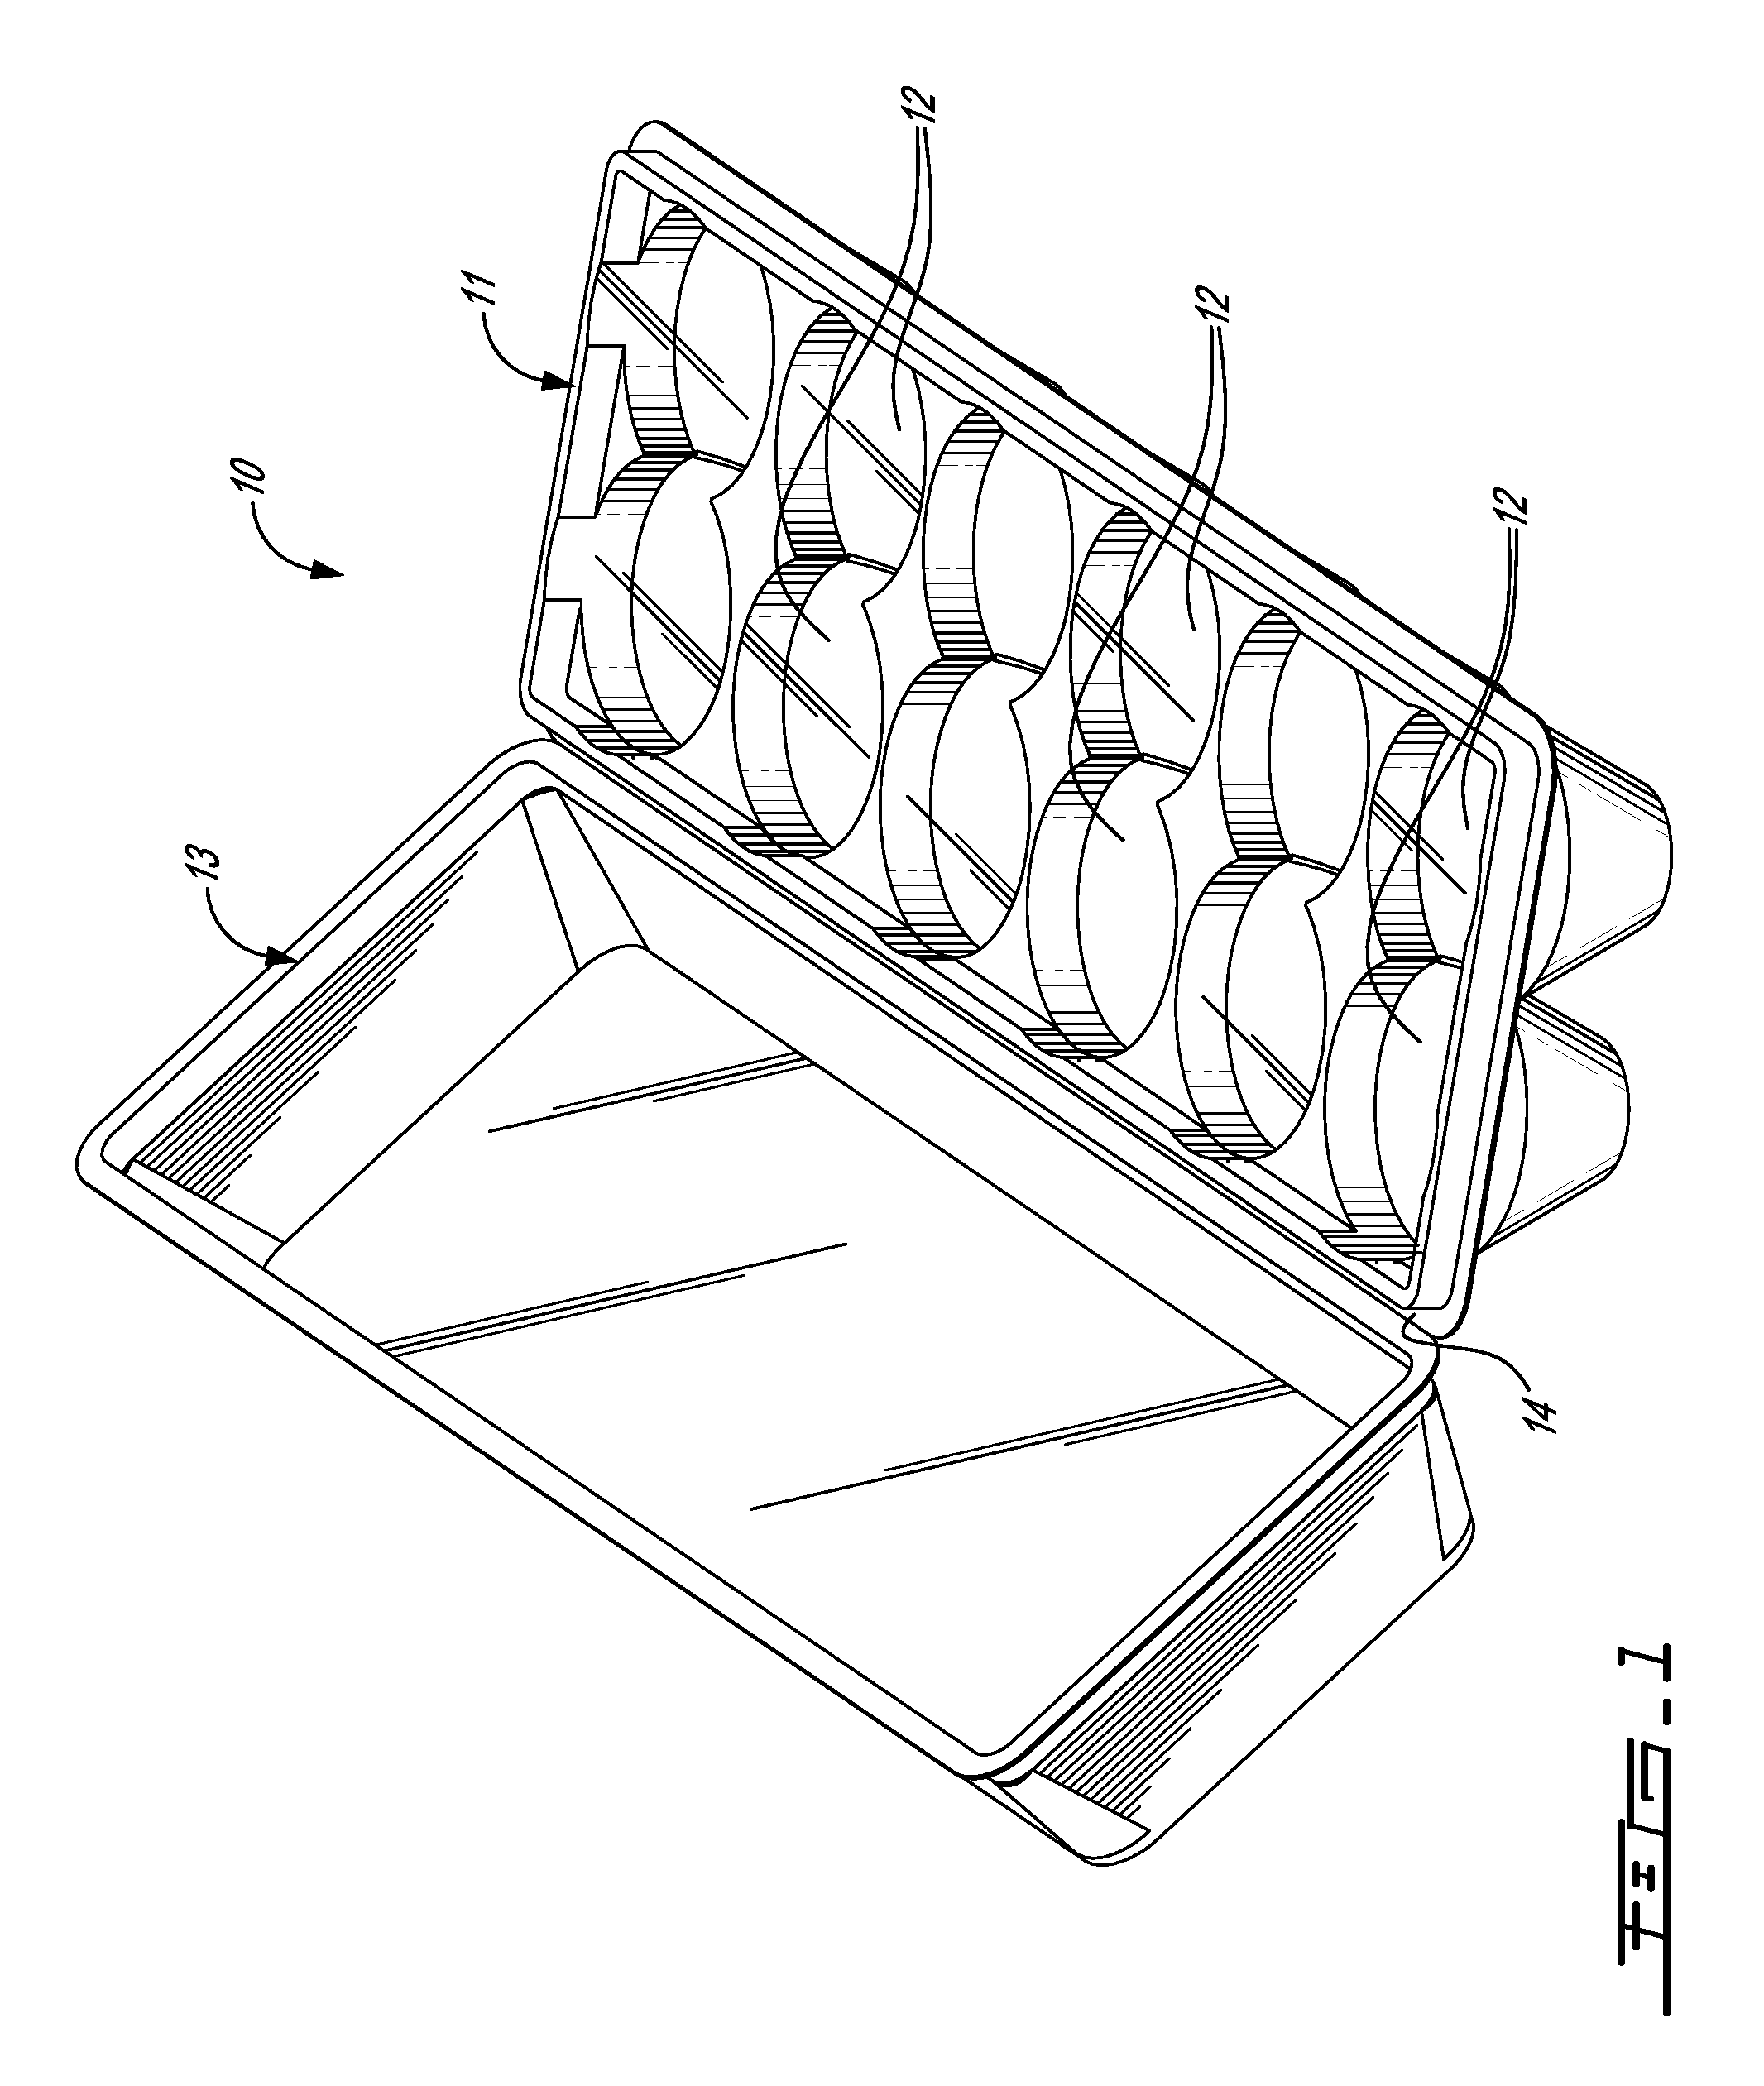 Stacking configuration for container for frangible items